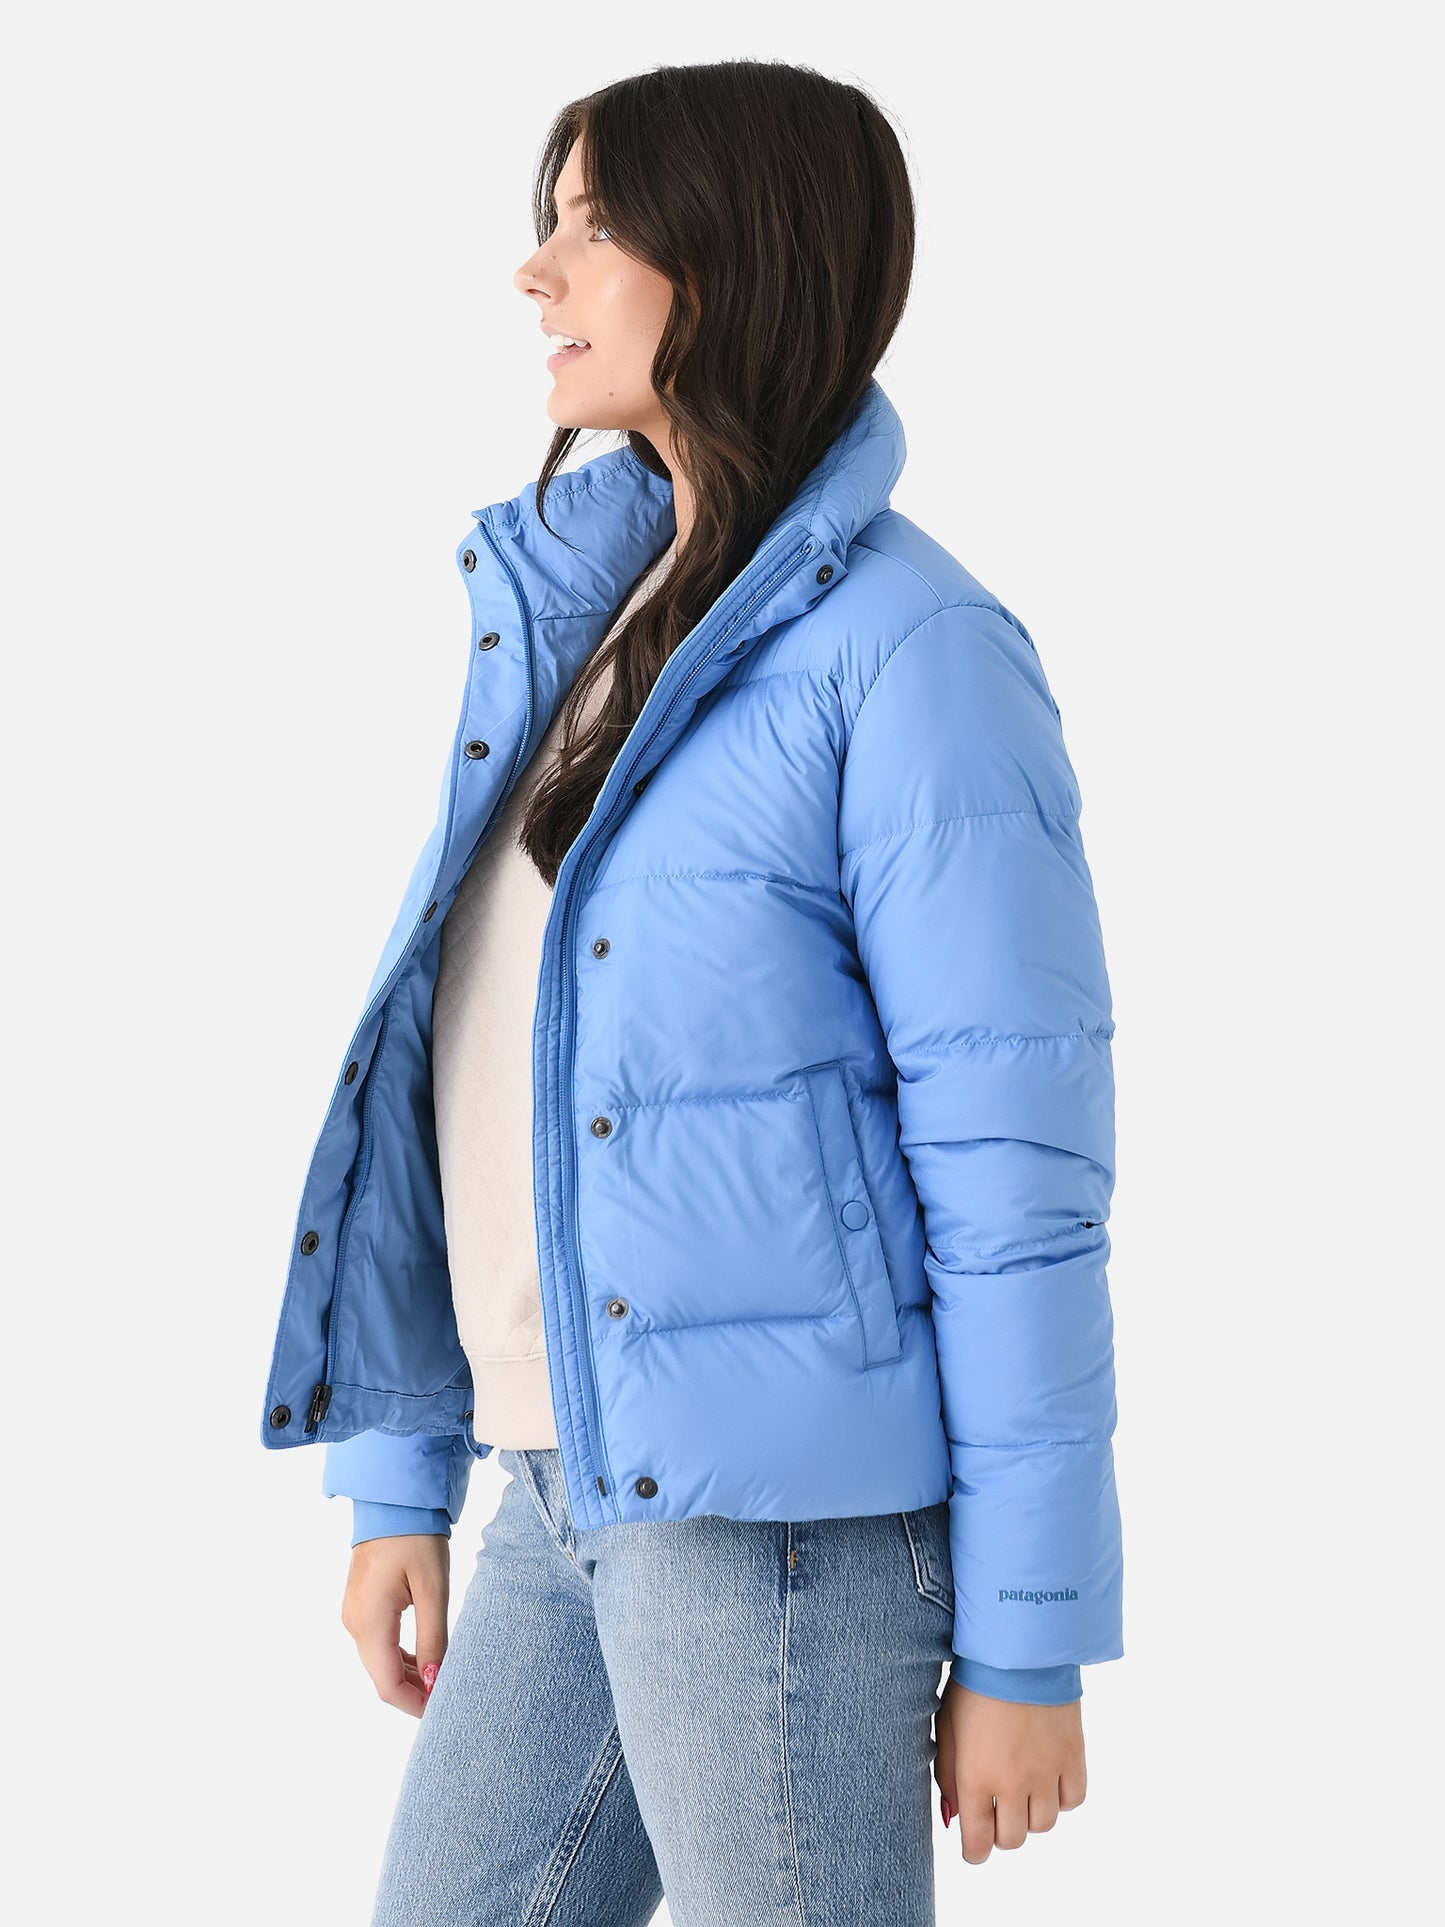 Patagonia, Jackets & Coats, Blue And Turquoise Patagonia Winter Jacket  Size S Women